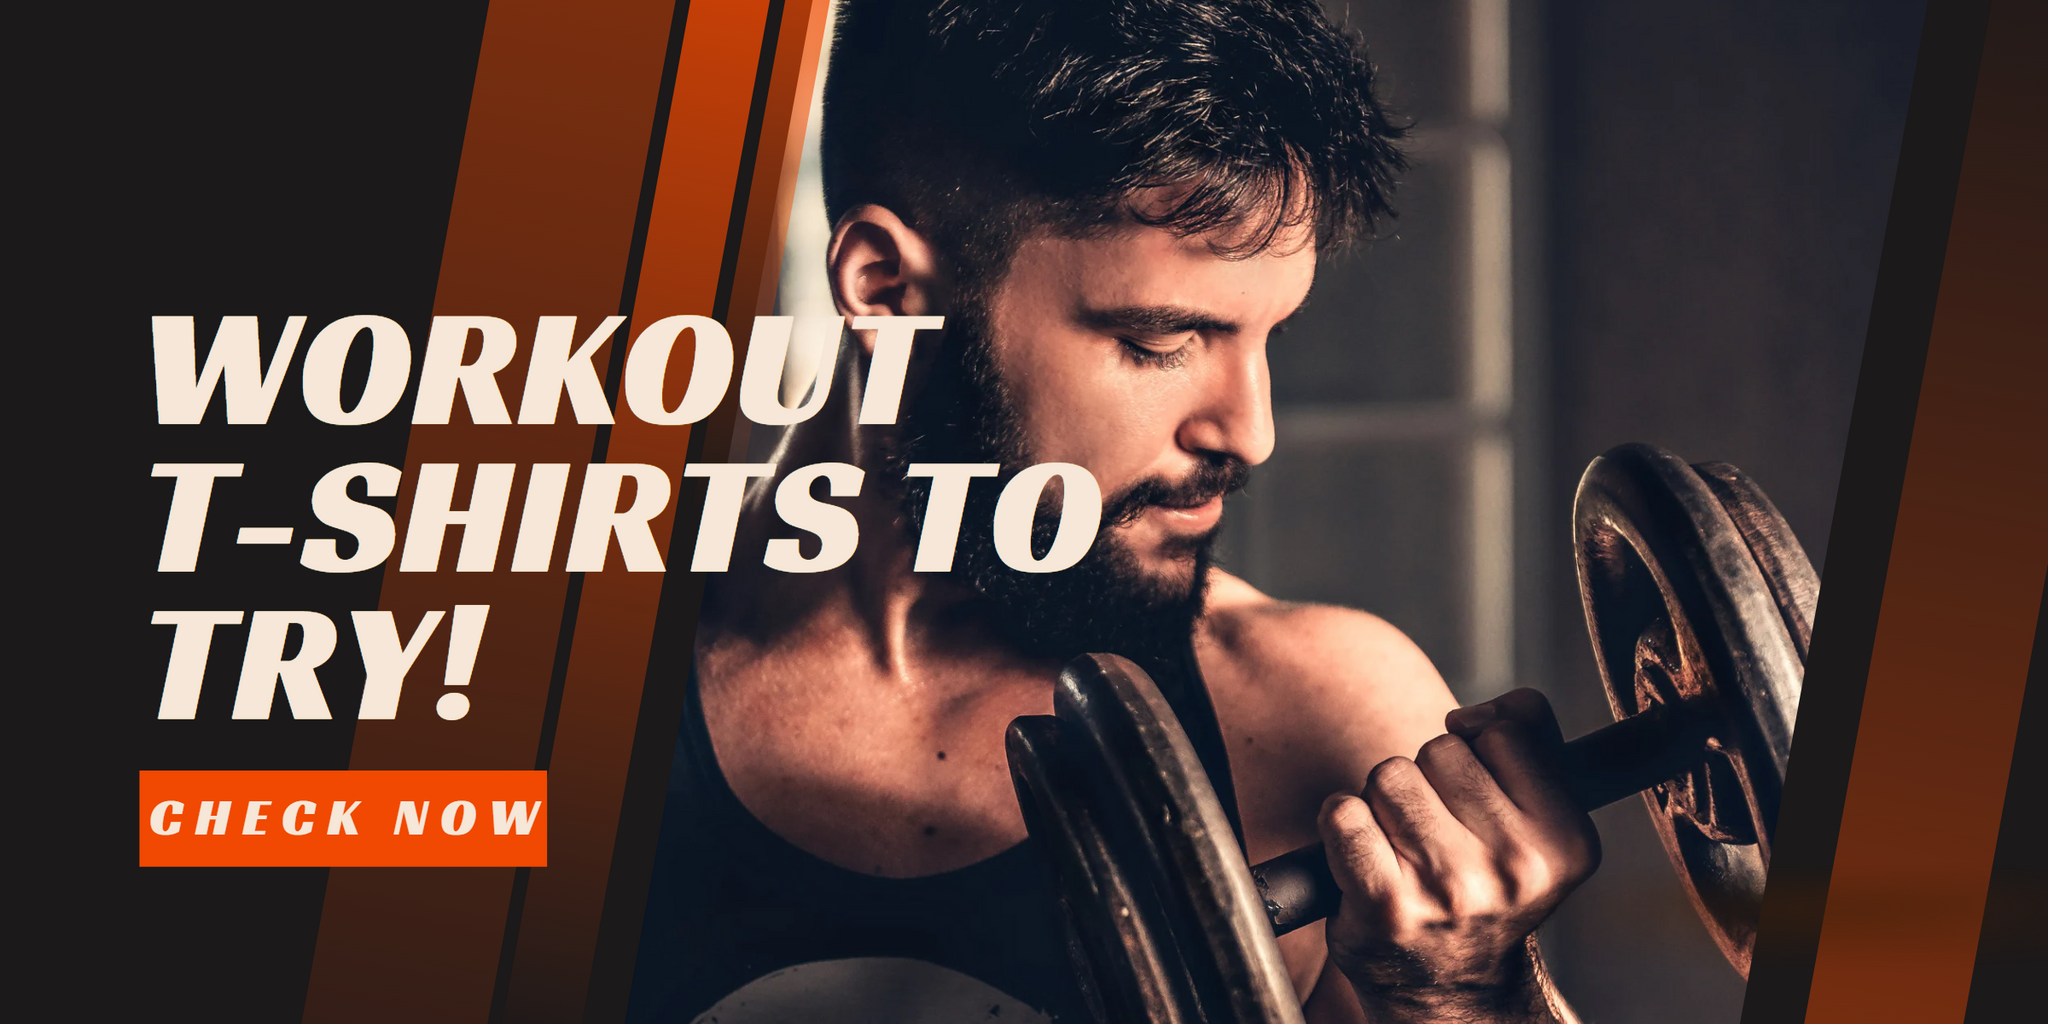 Keep cool while exercising with these workout t-shirts | Choose the right gym topwear